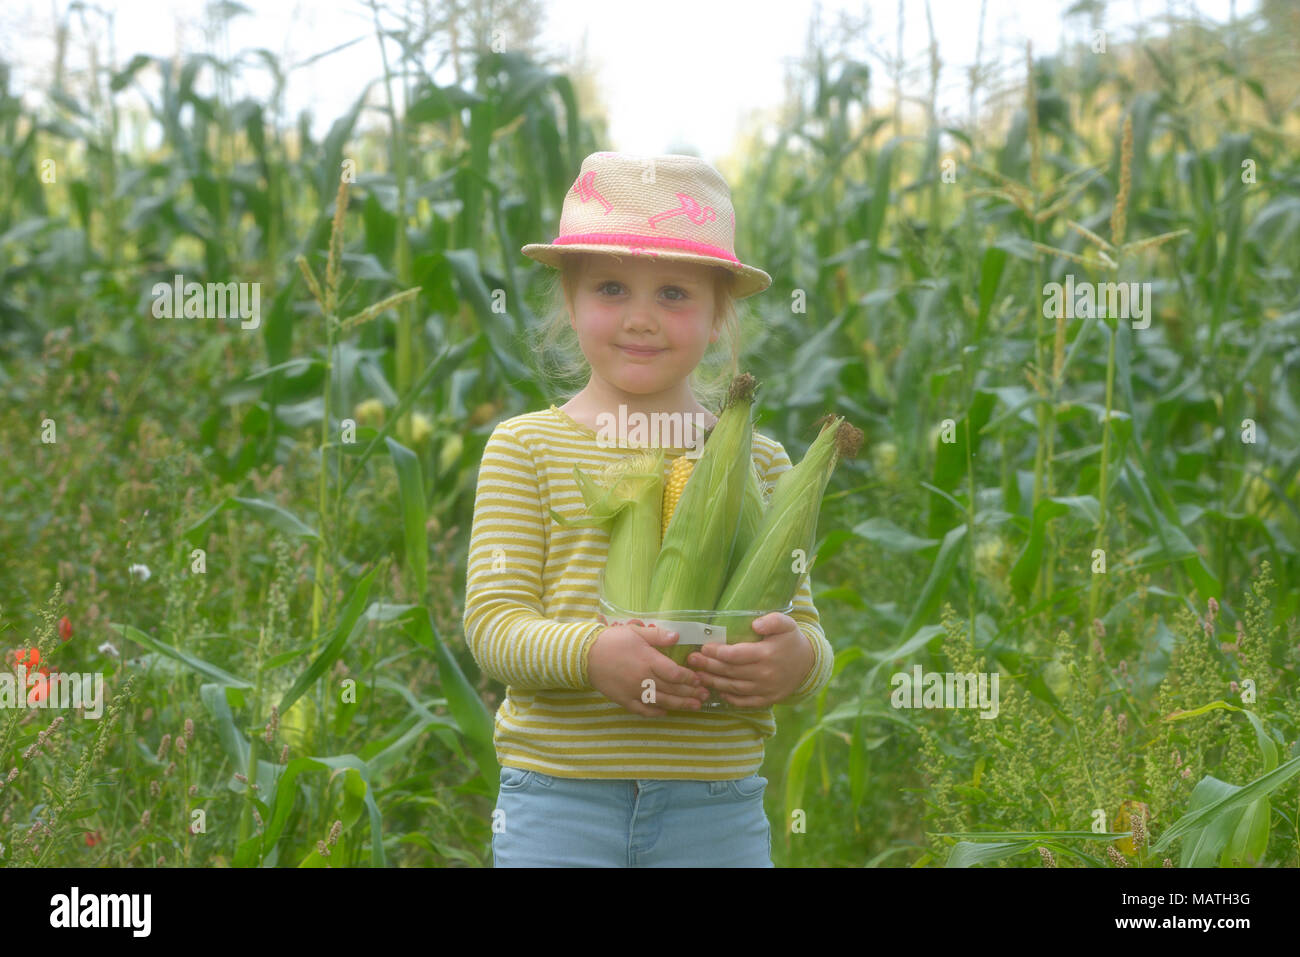 Pick your own sweetcorn at  Sharnfold farm, Stone Cross, Eastbourne, East Sussex, England, UK Stock Photo